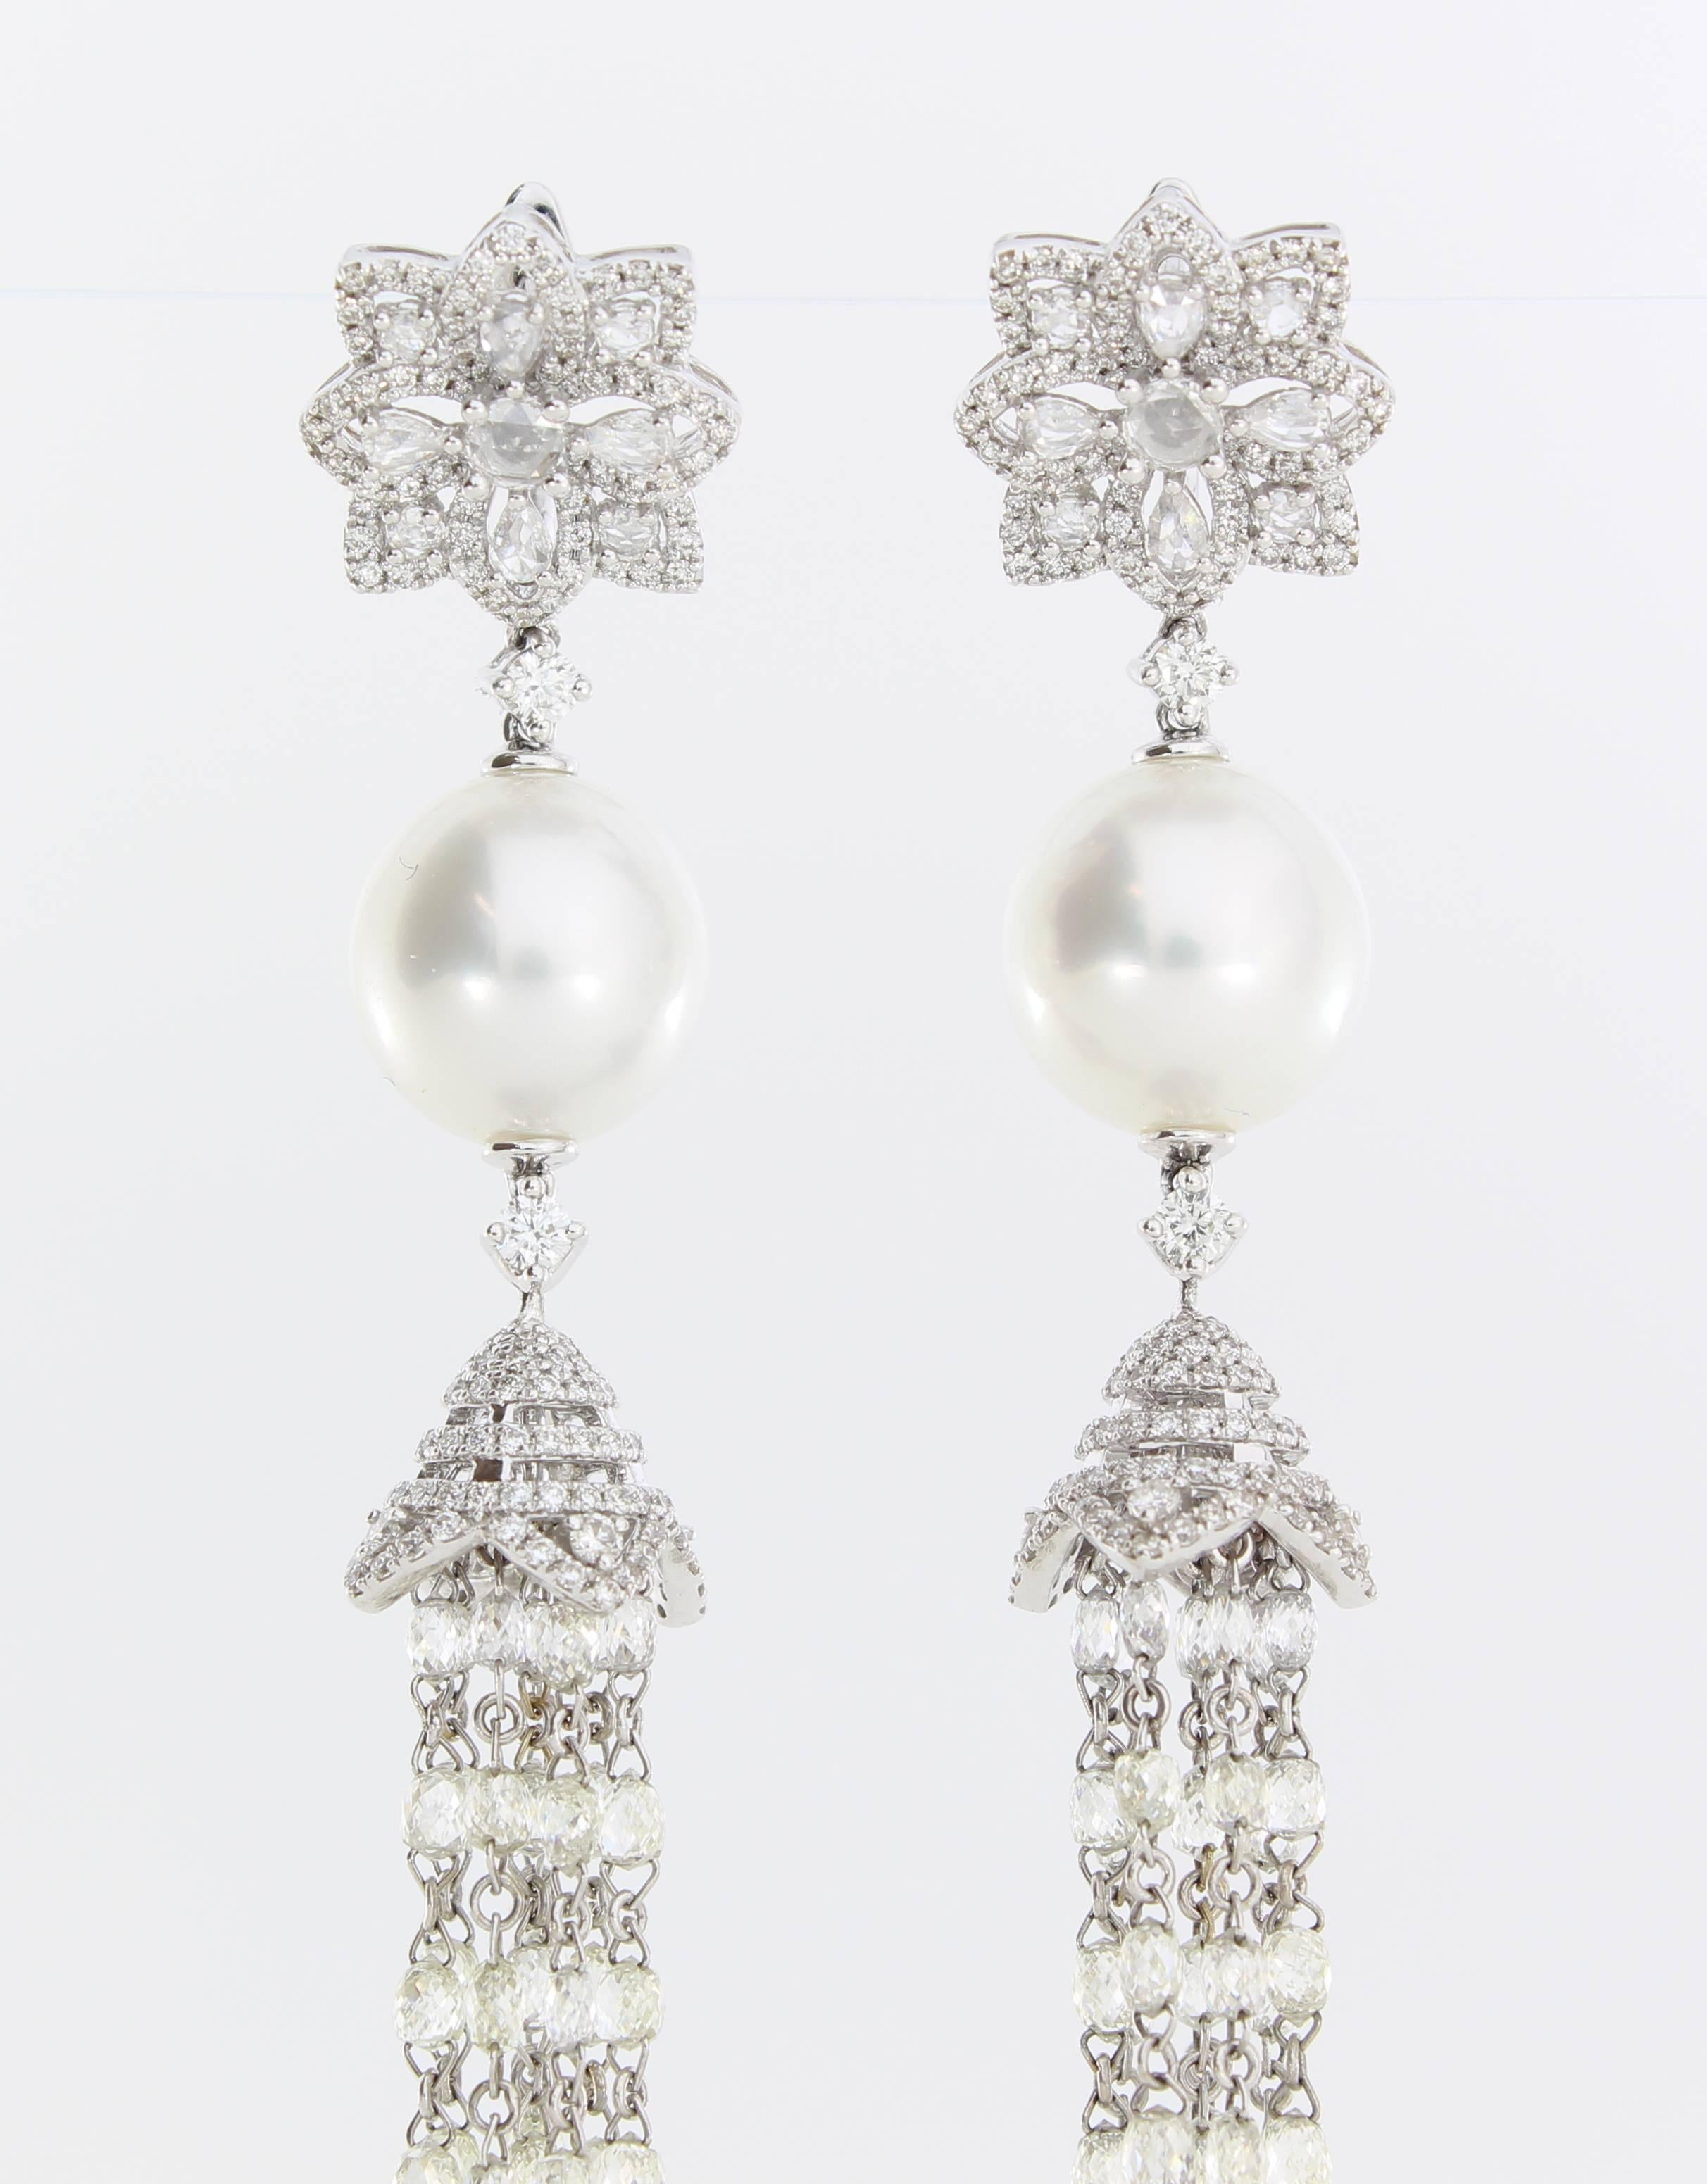 The Comet Earrings are from the AUTORE Stars & Galaxies Collection. 
This piece is crafted in 18k White Gold with White Diamonds (21.542ct Round, Drop, Rose and Briolette Cut) and 12mm Round Near Round White South Sea Pearls. 